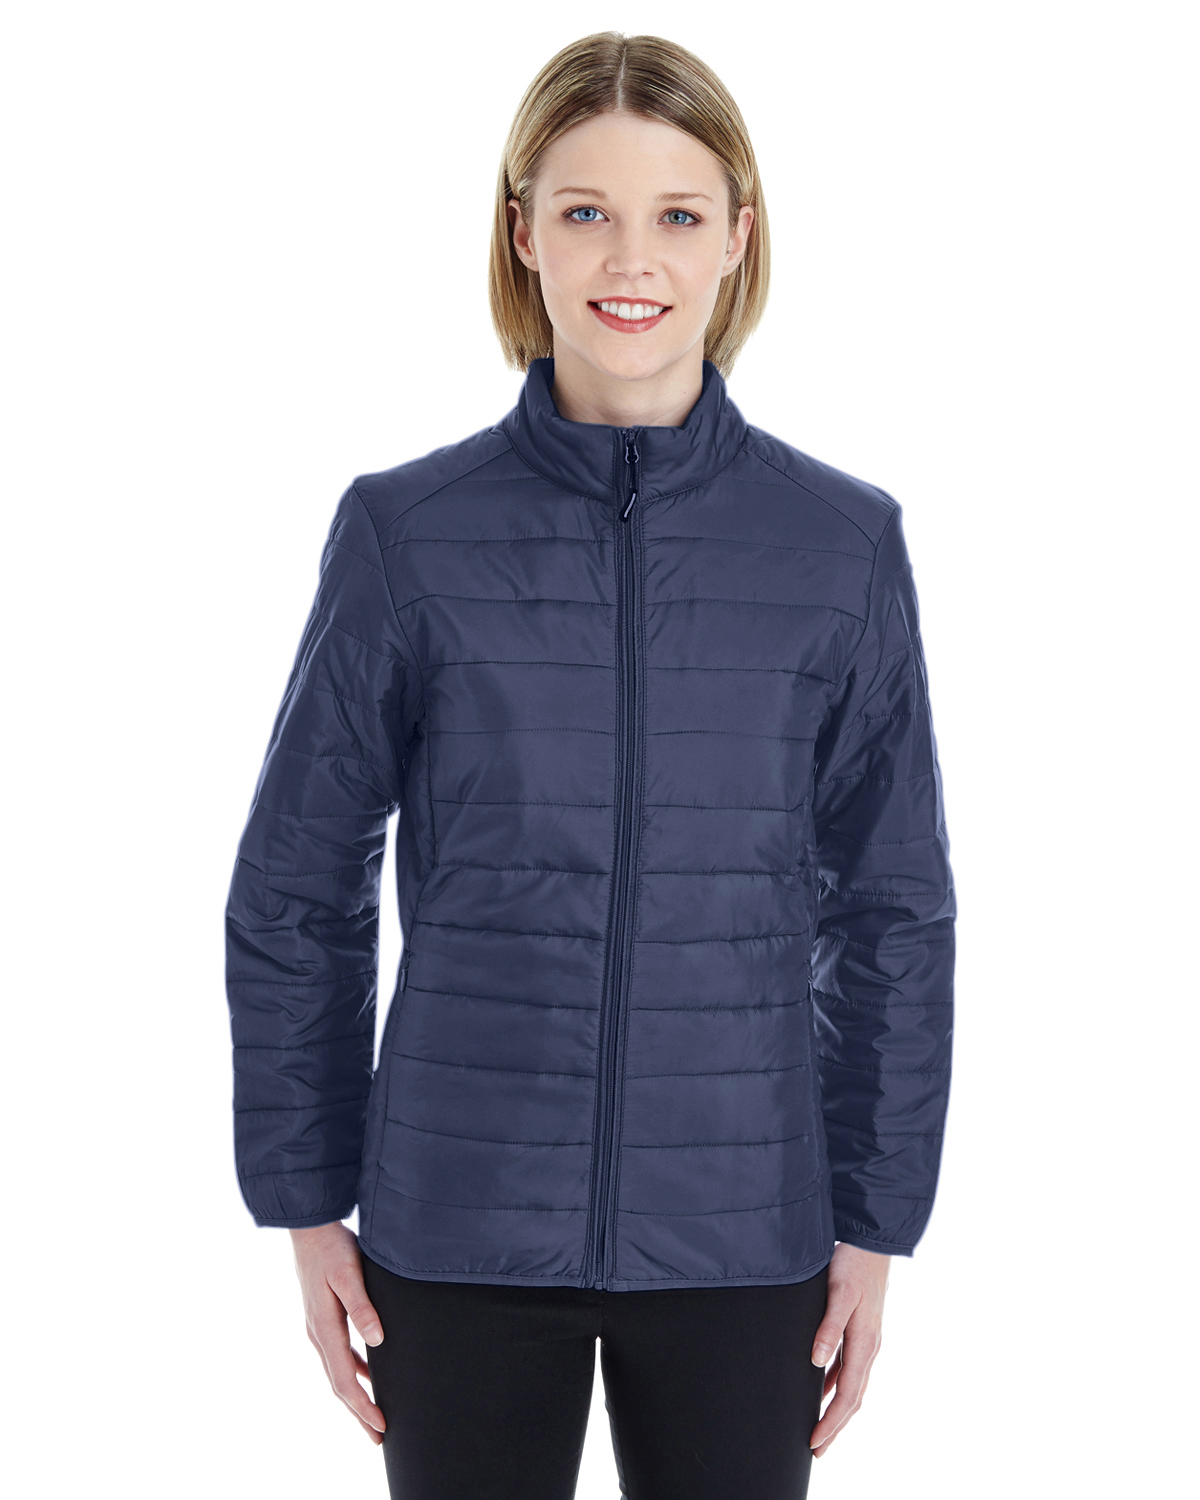 Core 365 CE700W - Ladies' Prevail Packable Puffer